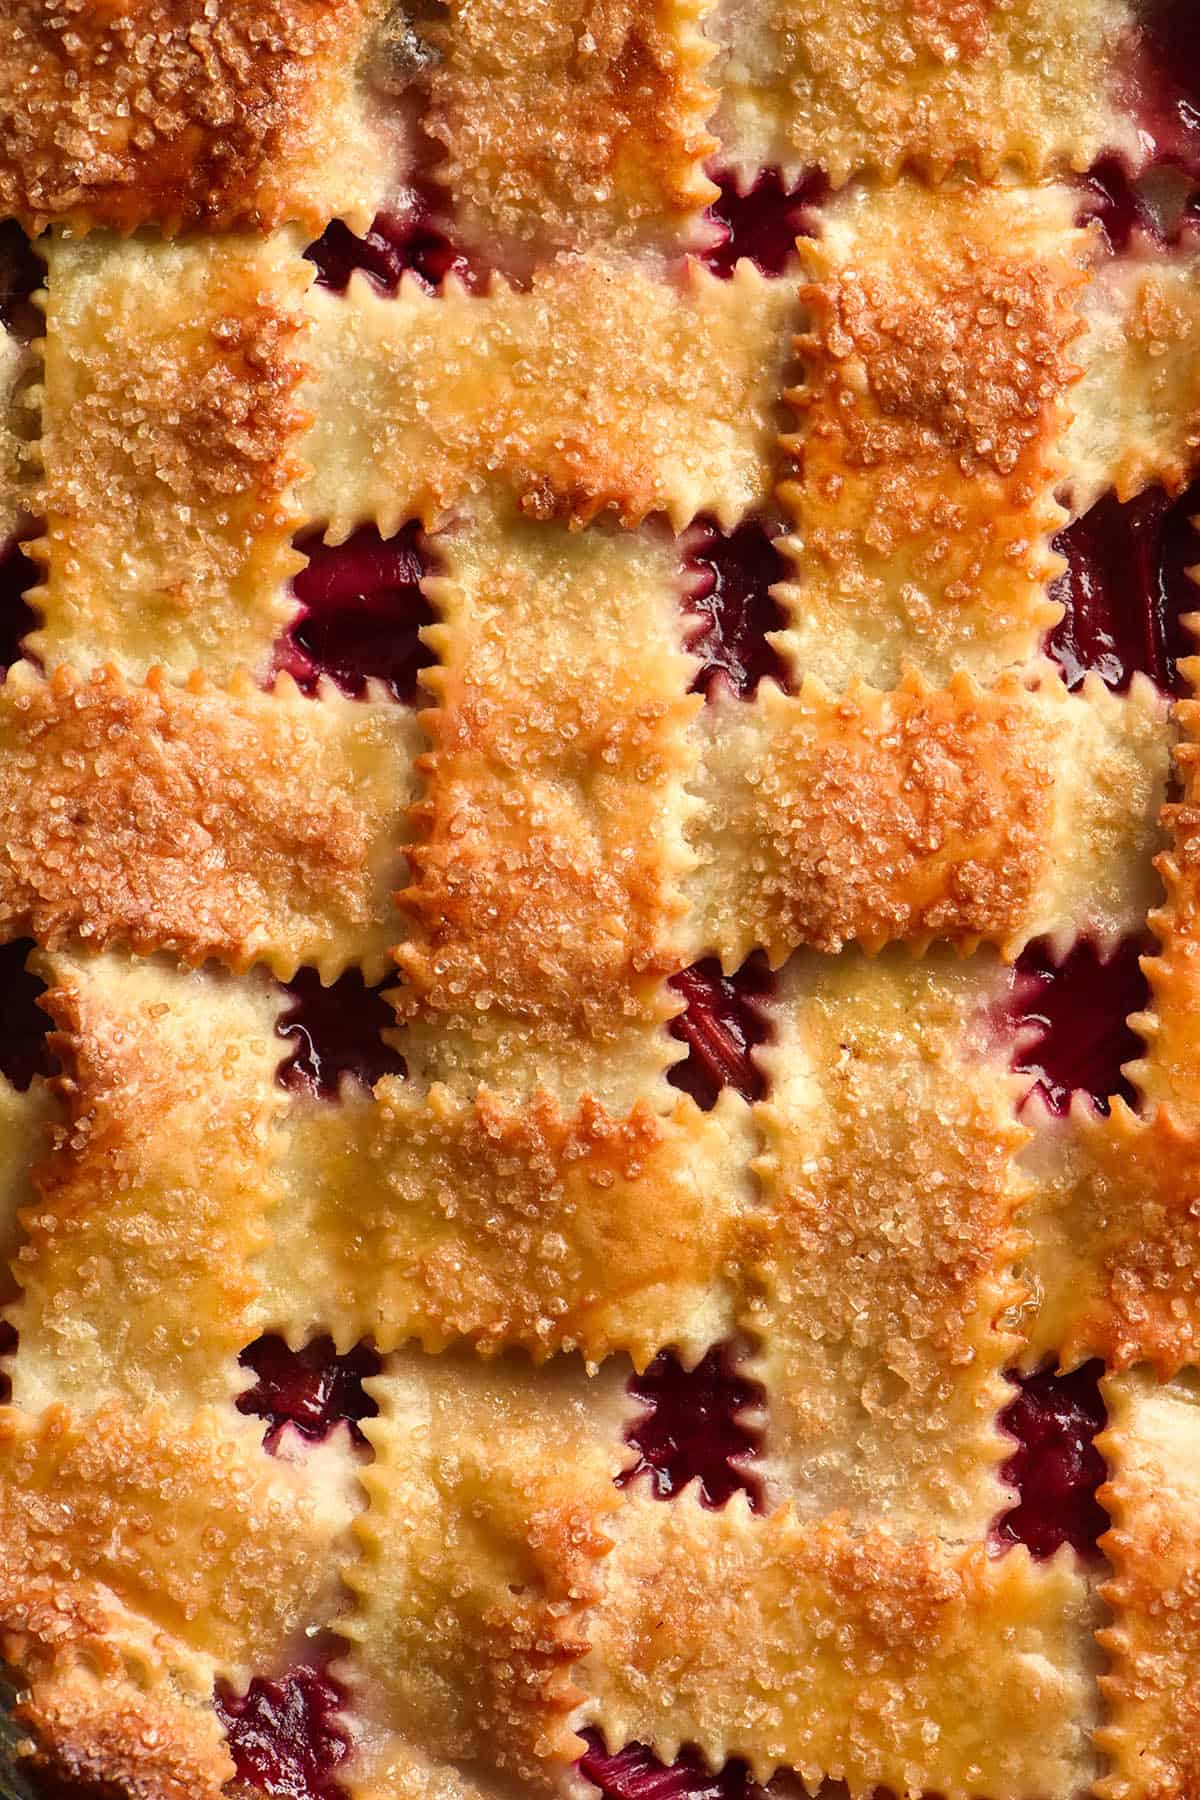 A macro close up photo of a strawberry lattice pie. The lattice pastry is golden and finished with crunchy sugar, while the strawberry filling oozes up through the holes in the latticework.